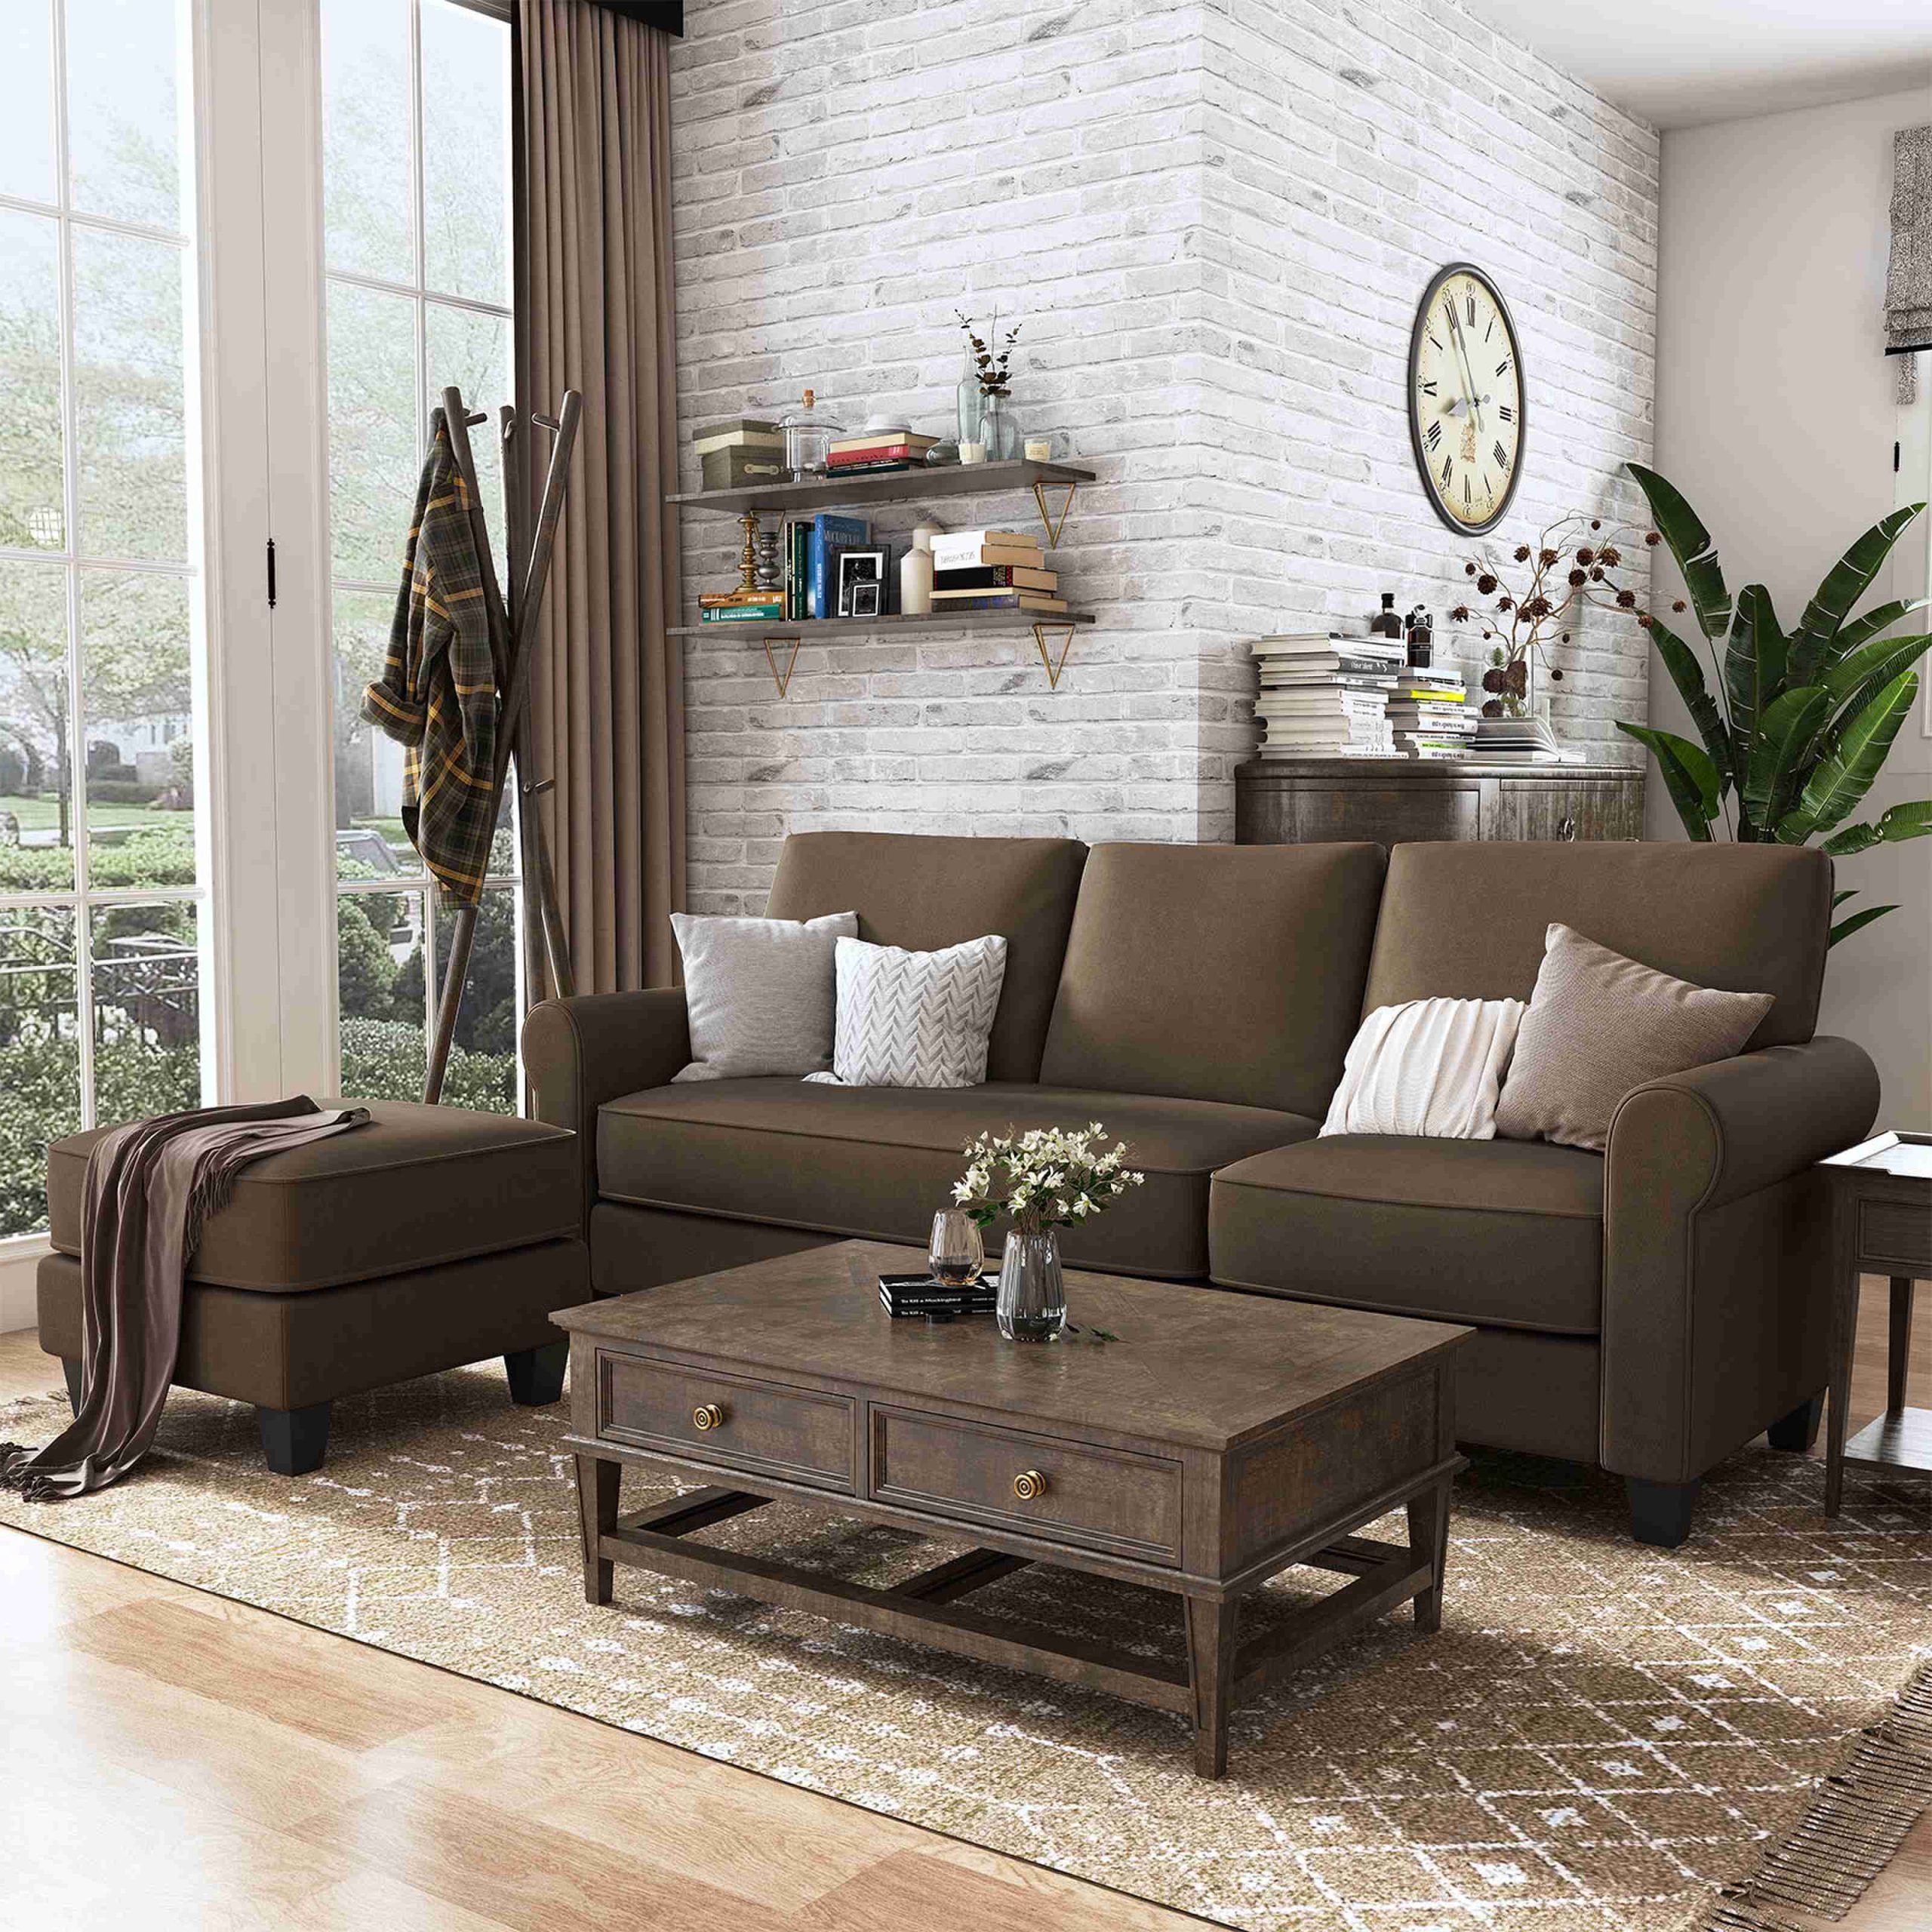 Nolany Convertible Sectional Sofa L Shaped Couch 3 Seat Sofa With Chaise, Chocolate  Brown – Walmart Within Sofas In Chocolate Brown (Photo 3 of 15)